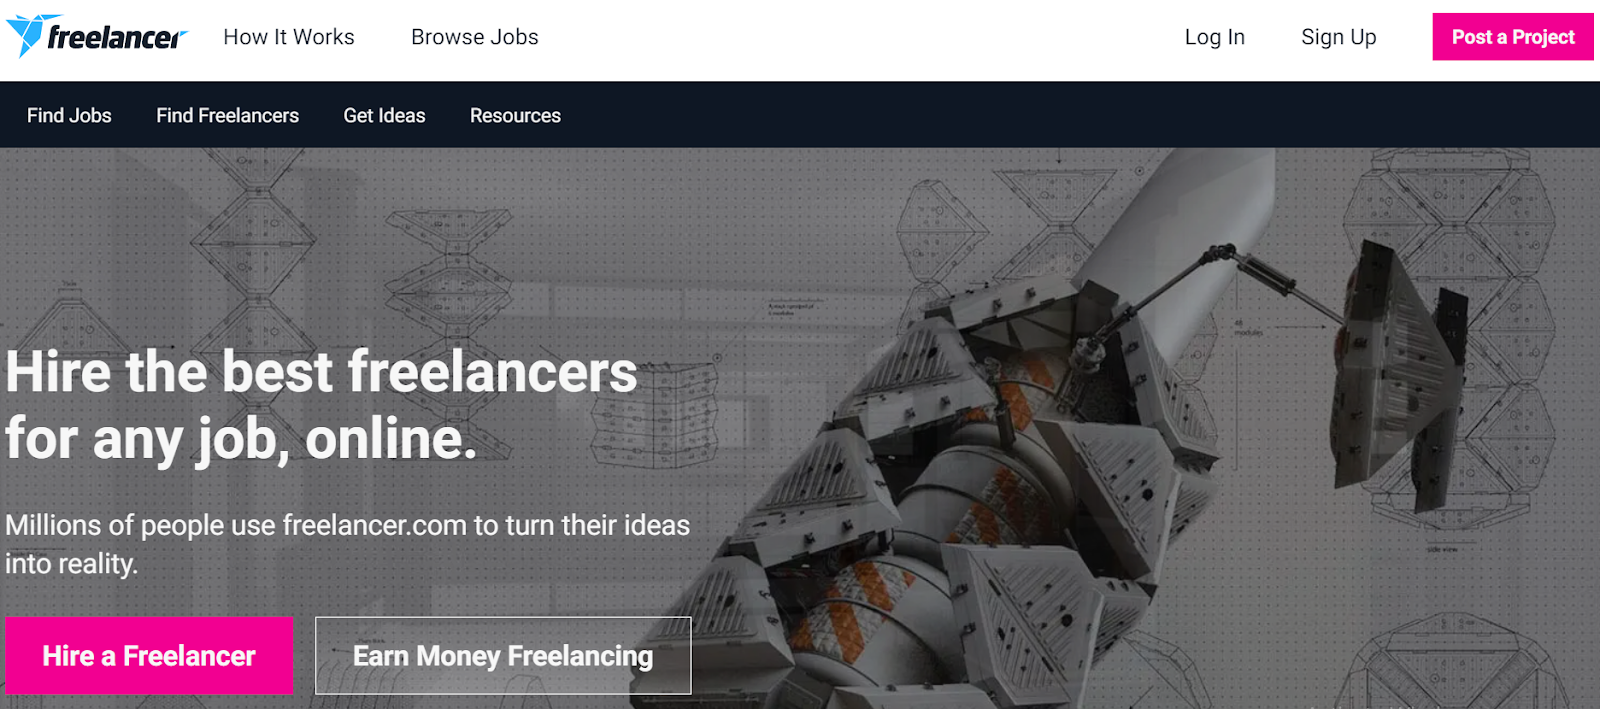 Freelancer home page